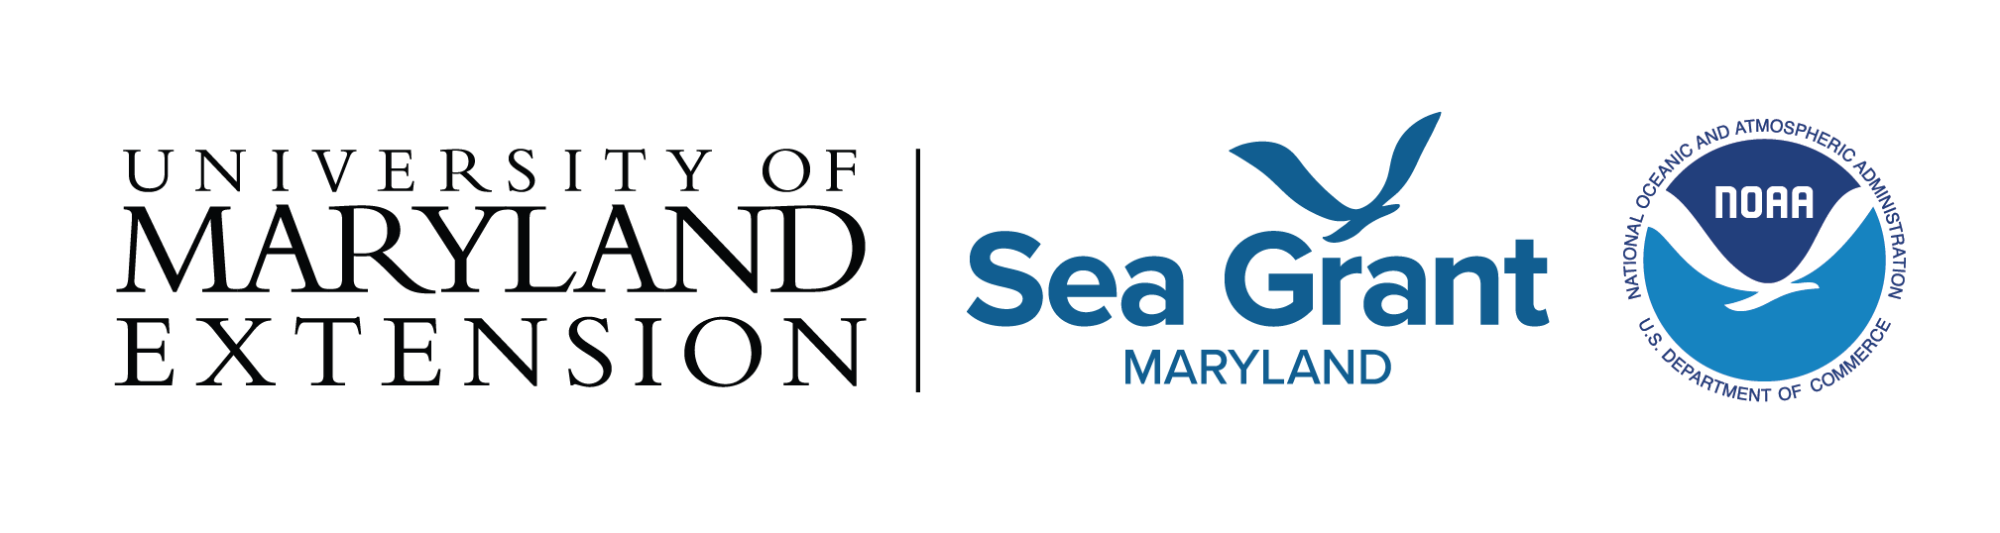 University of Maryland Extension and Maryland Sea Grant logos